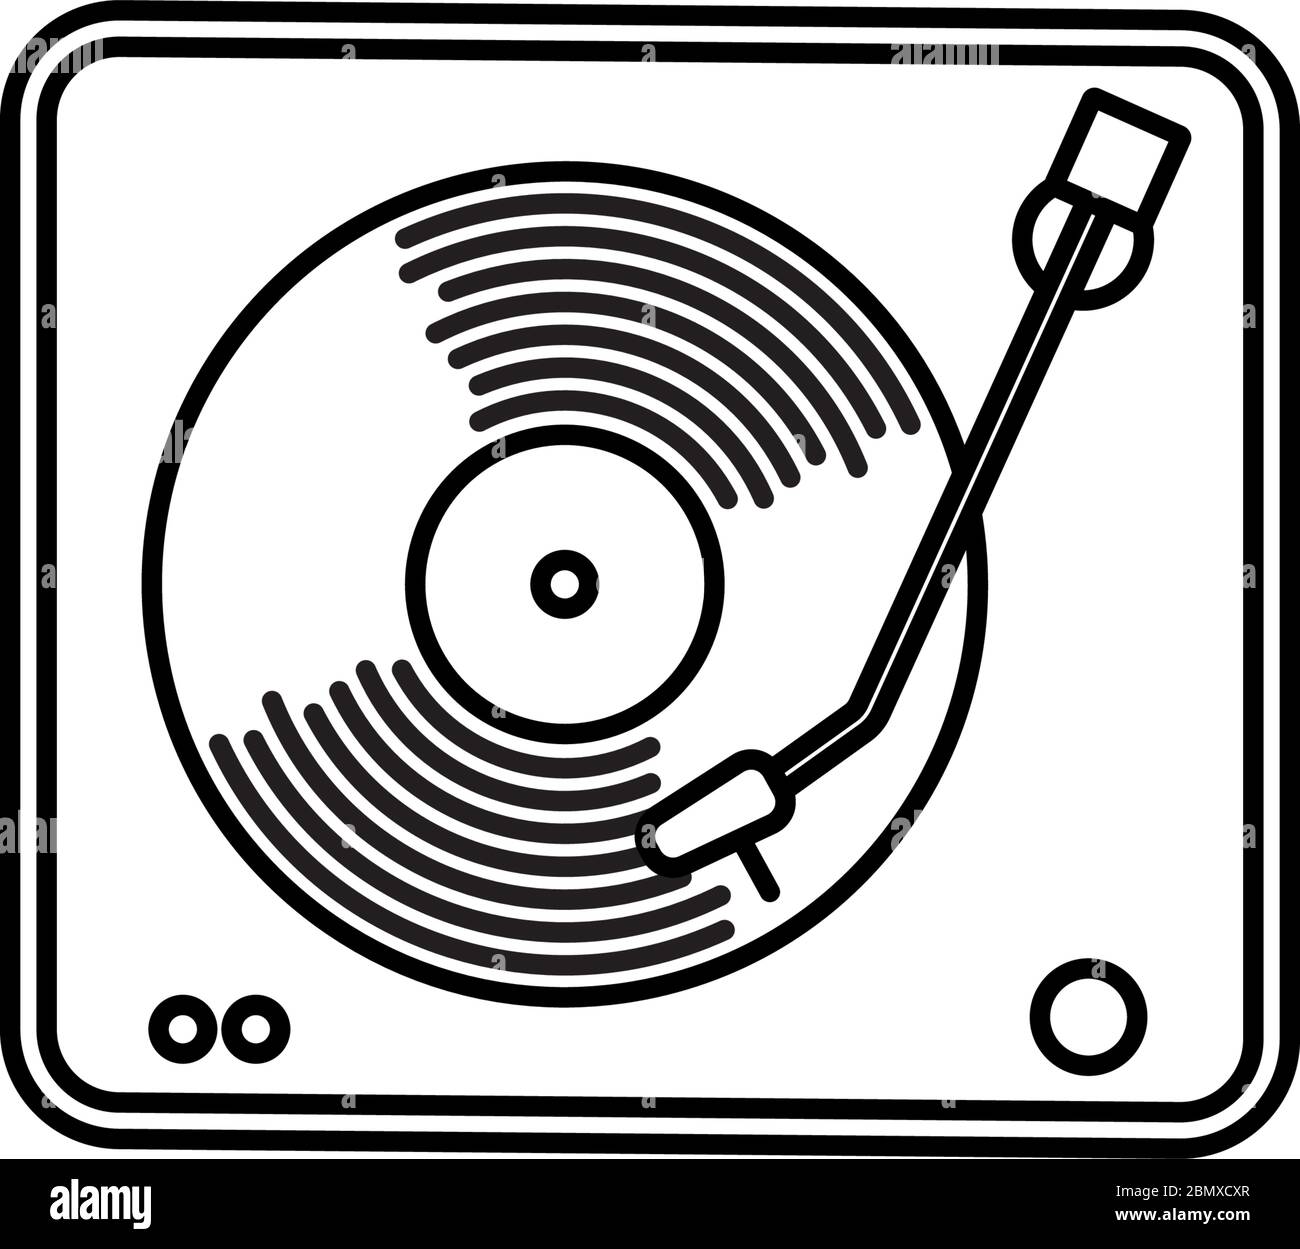 Vintage turntable vector line icon. Vinyl recordings and home ...